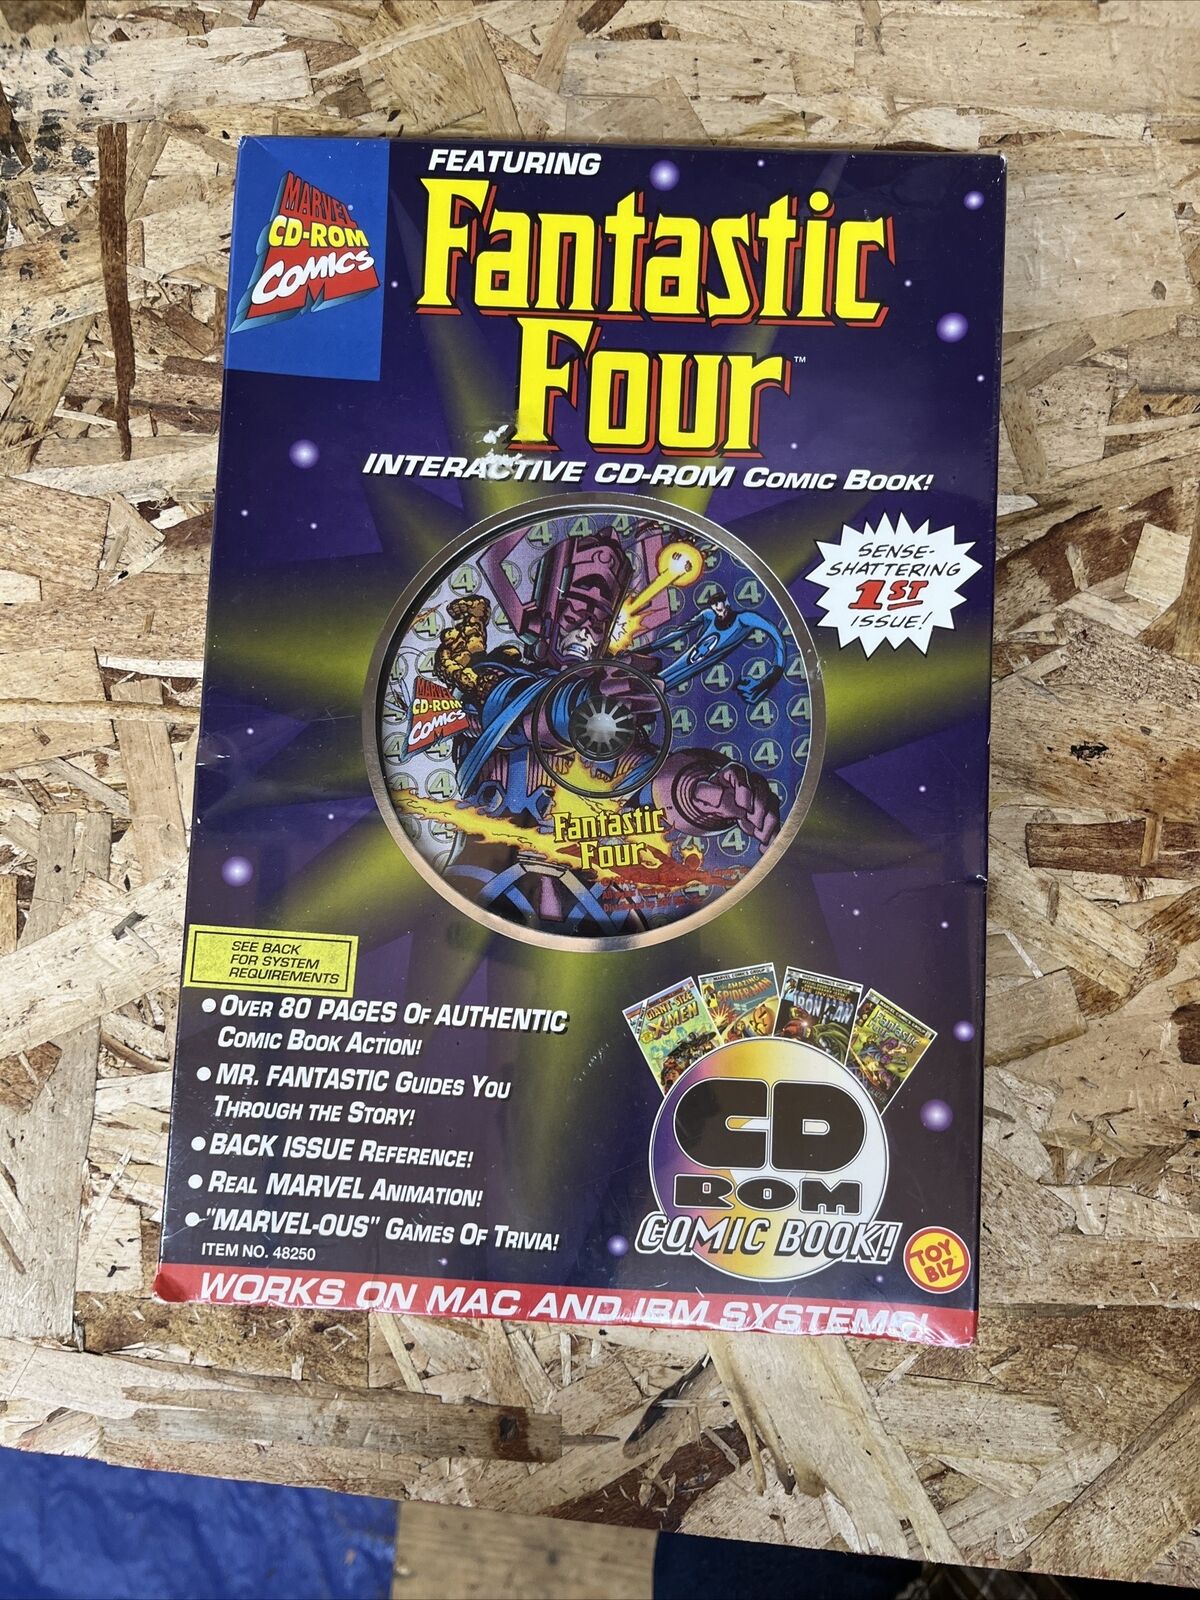 NEW SEALED 1995 Marvel CD-ROM Fantastic Four Interactive Comic w/ CDs